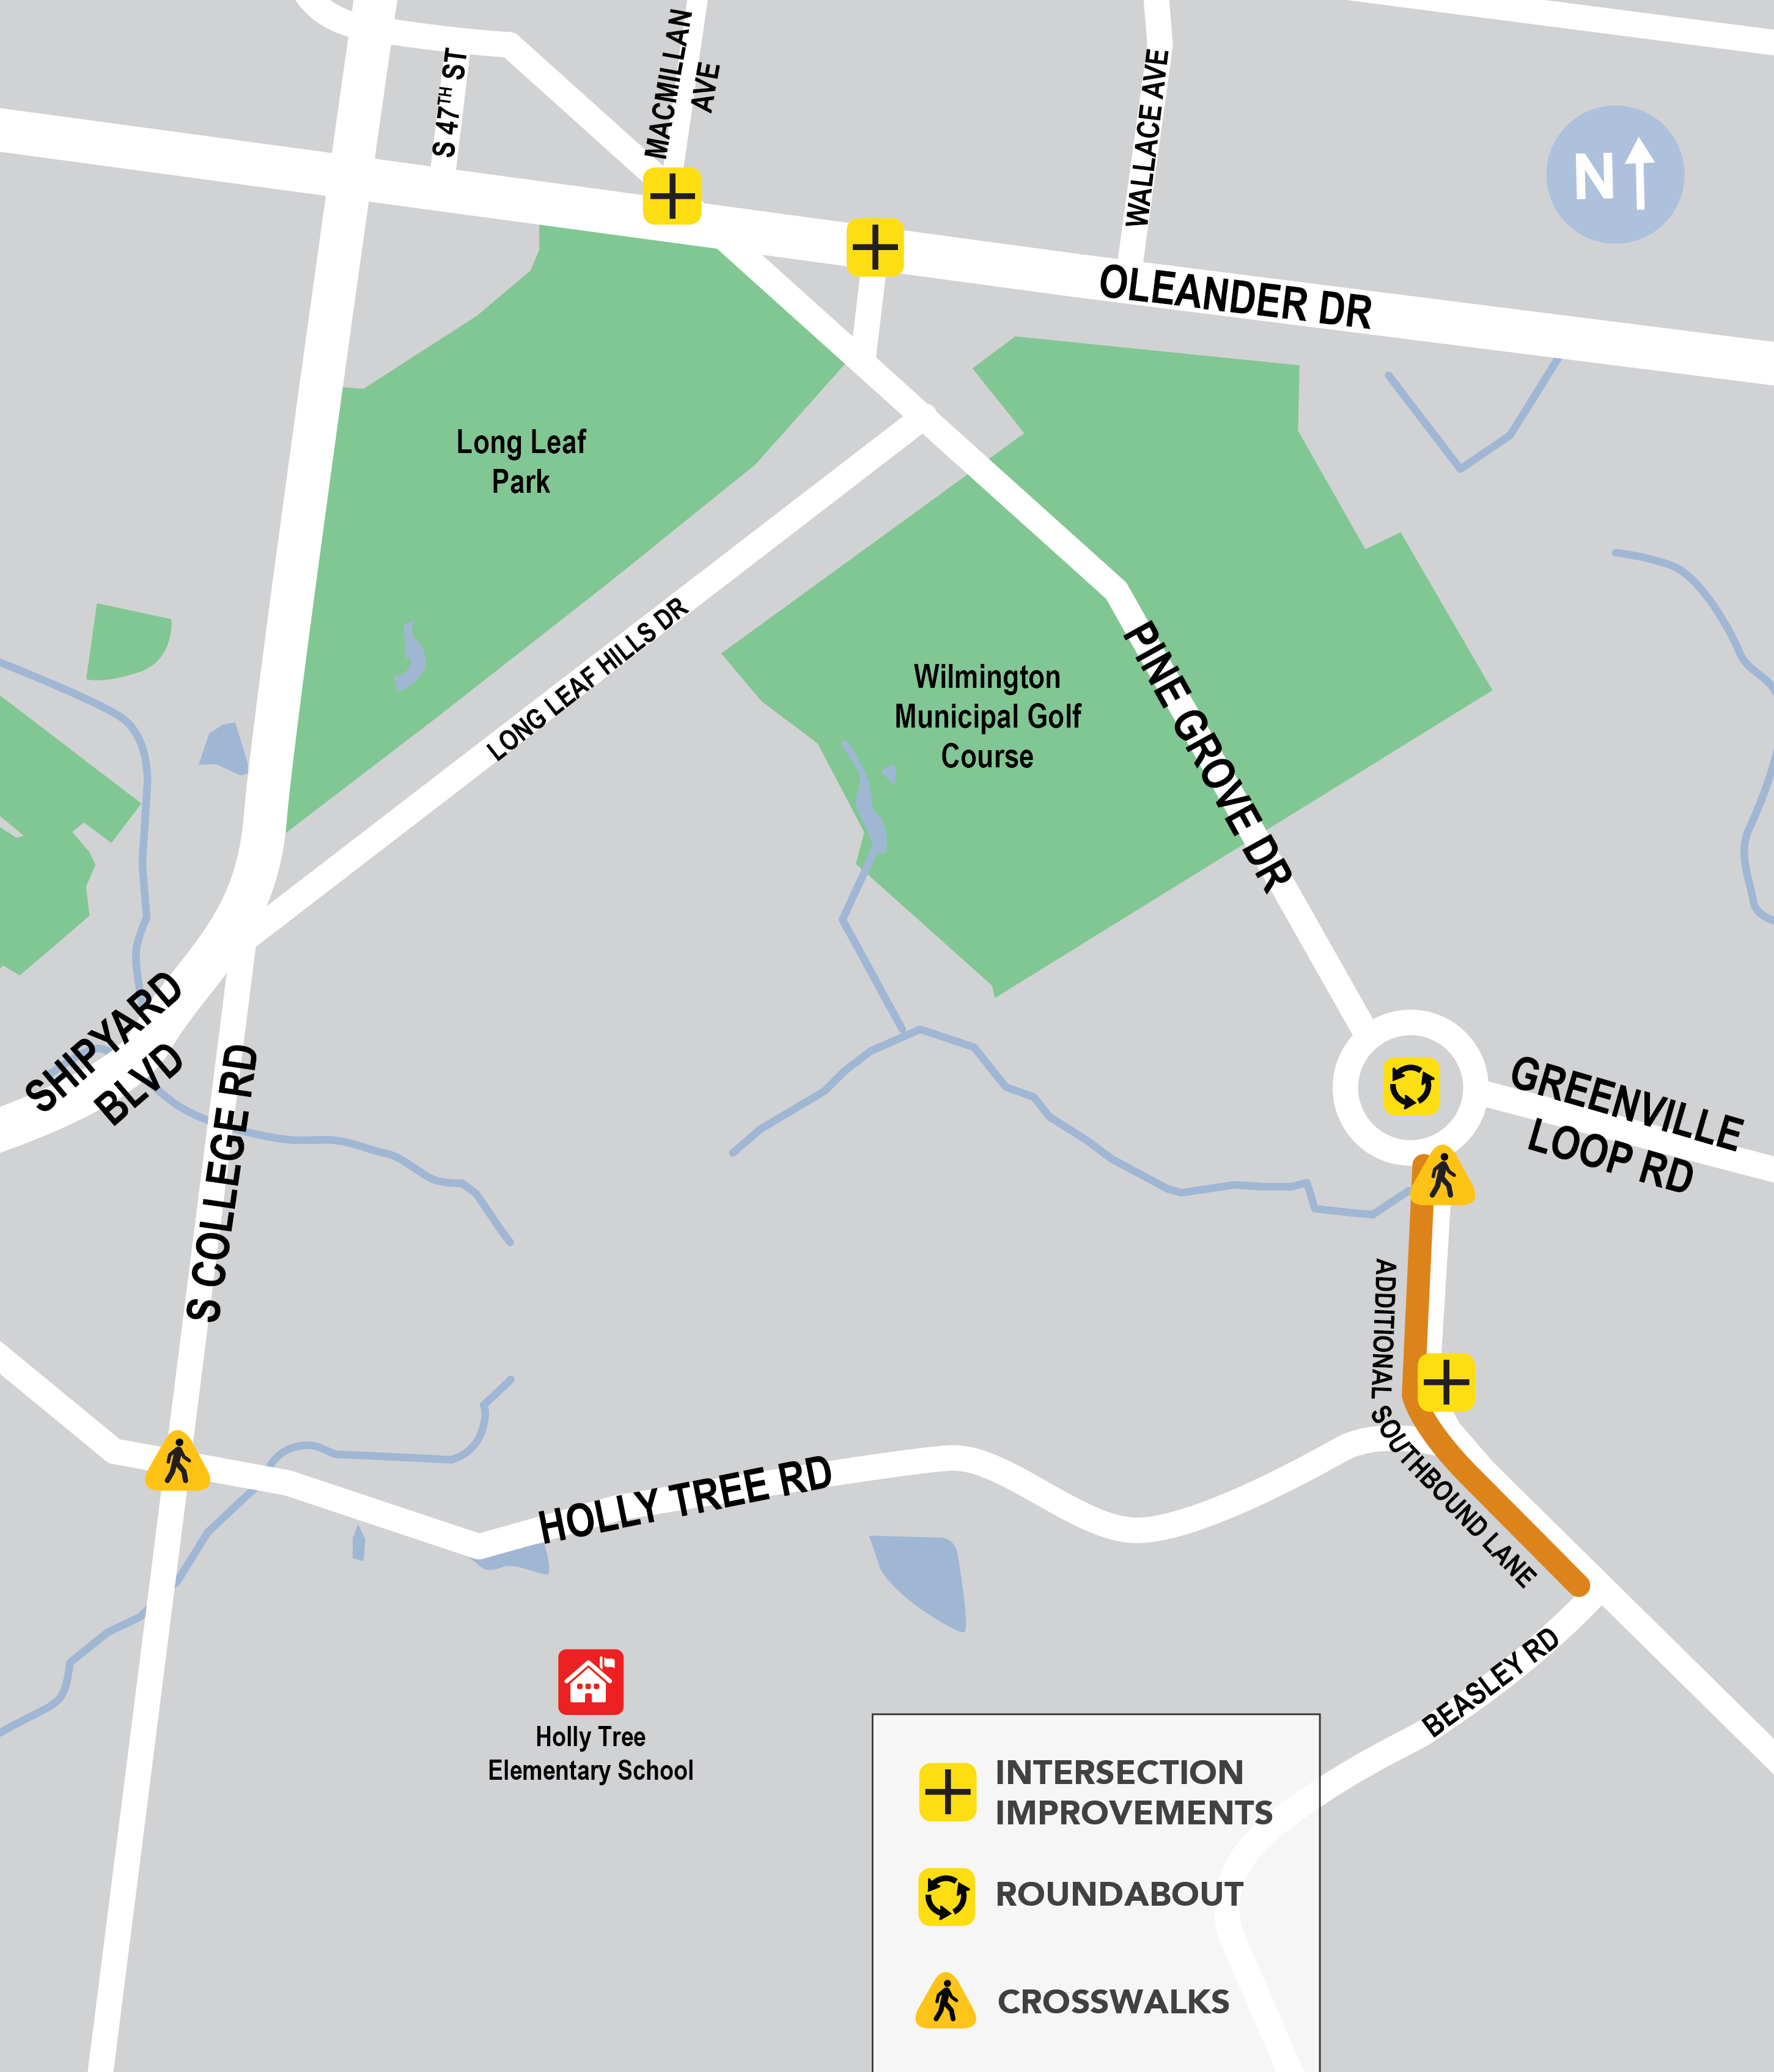 Map of Pine Grove Drive intersection improvements